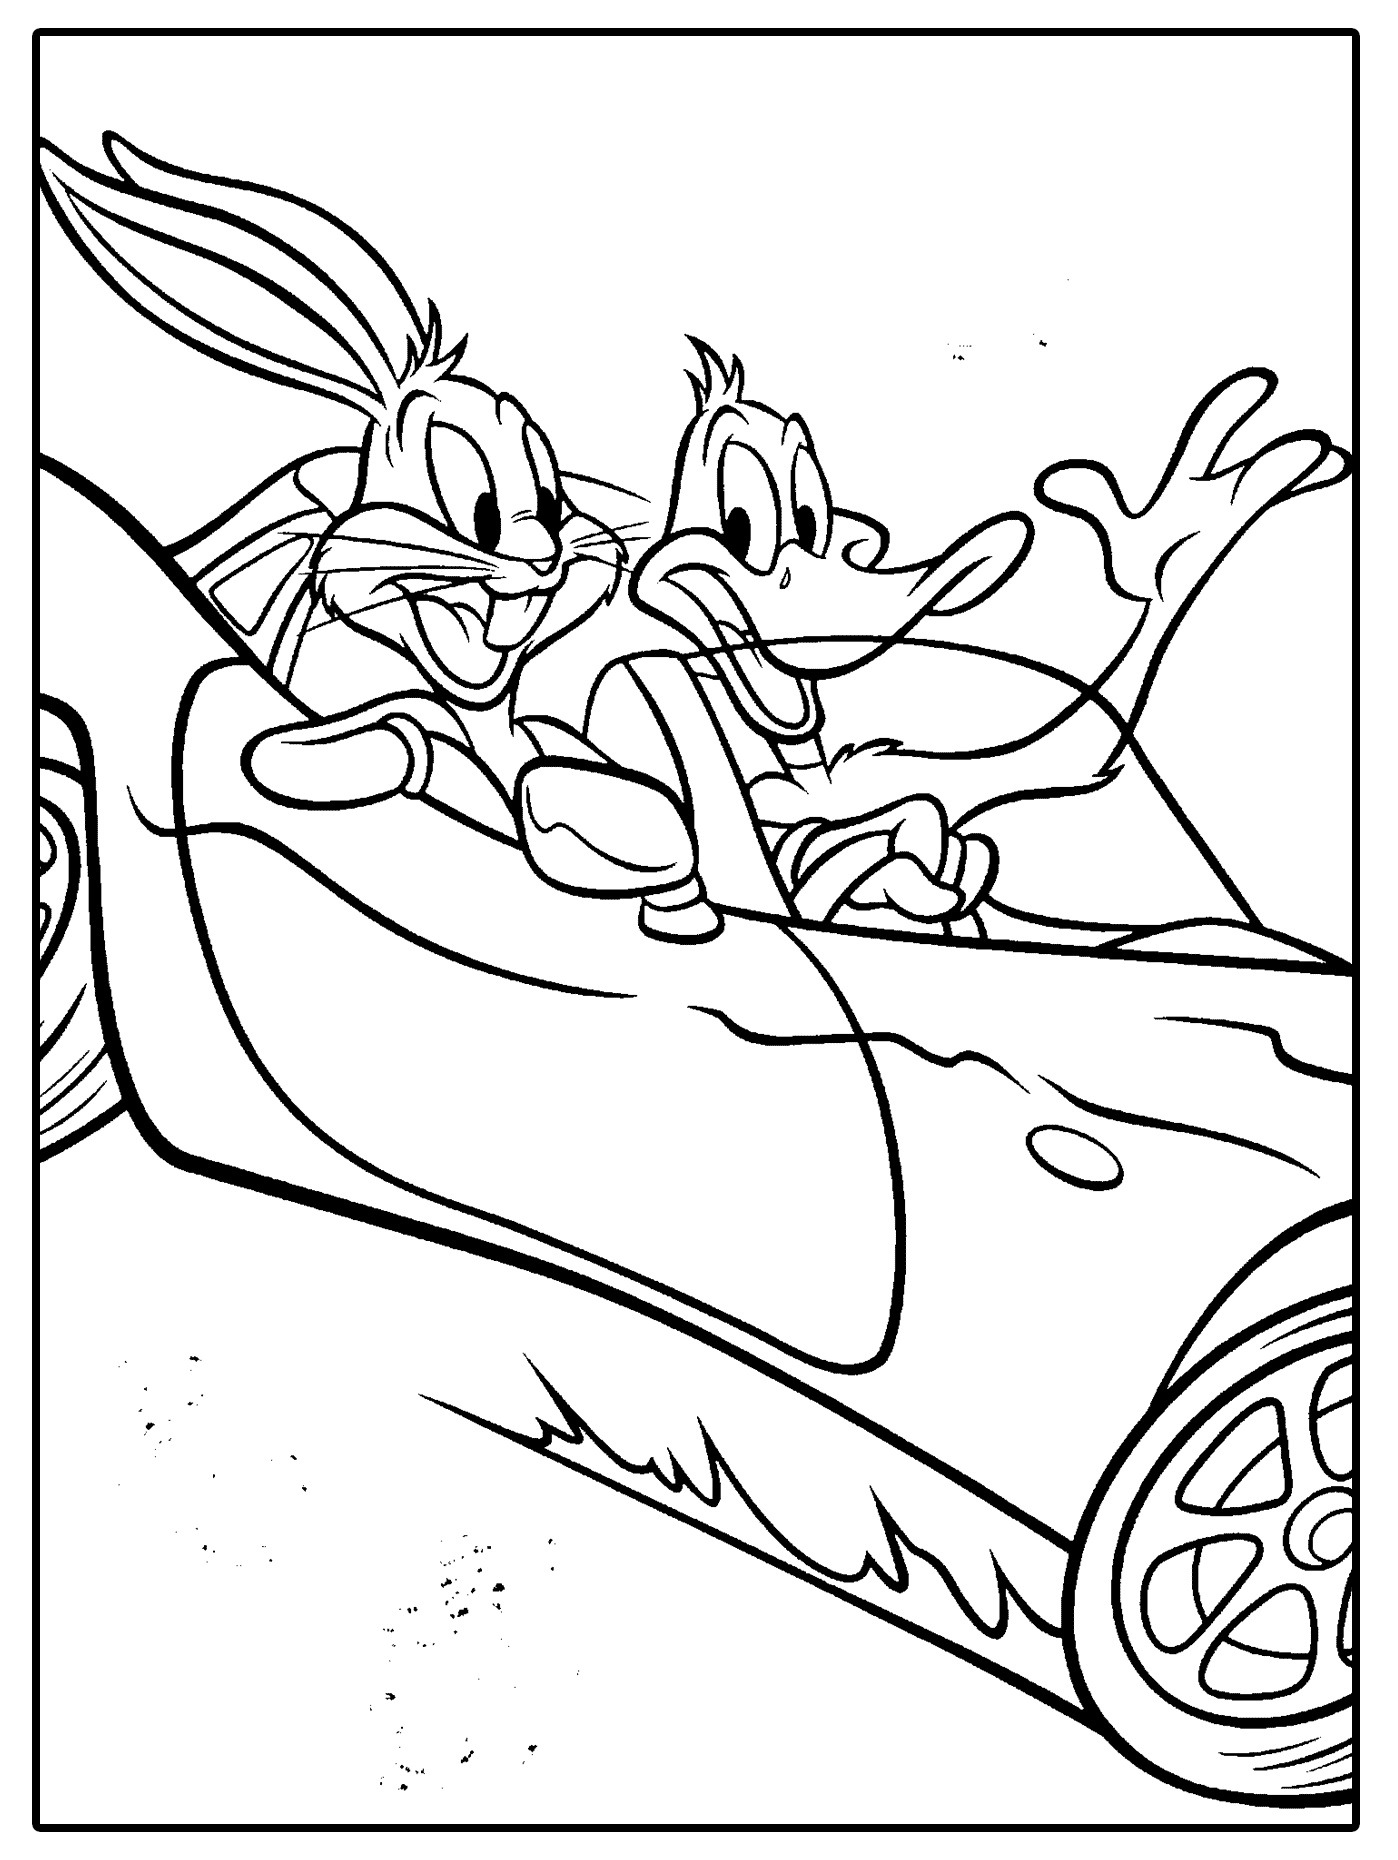 Looney Tunes Coloring Page LOONEY TUNES SPOT COLORING PAGES Coloring Home